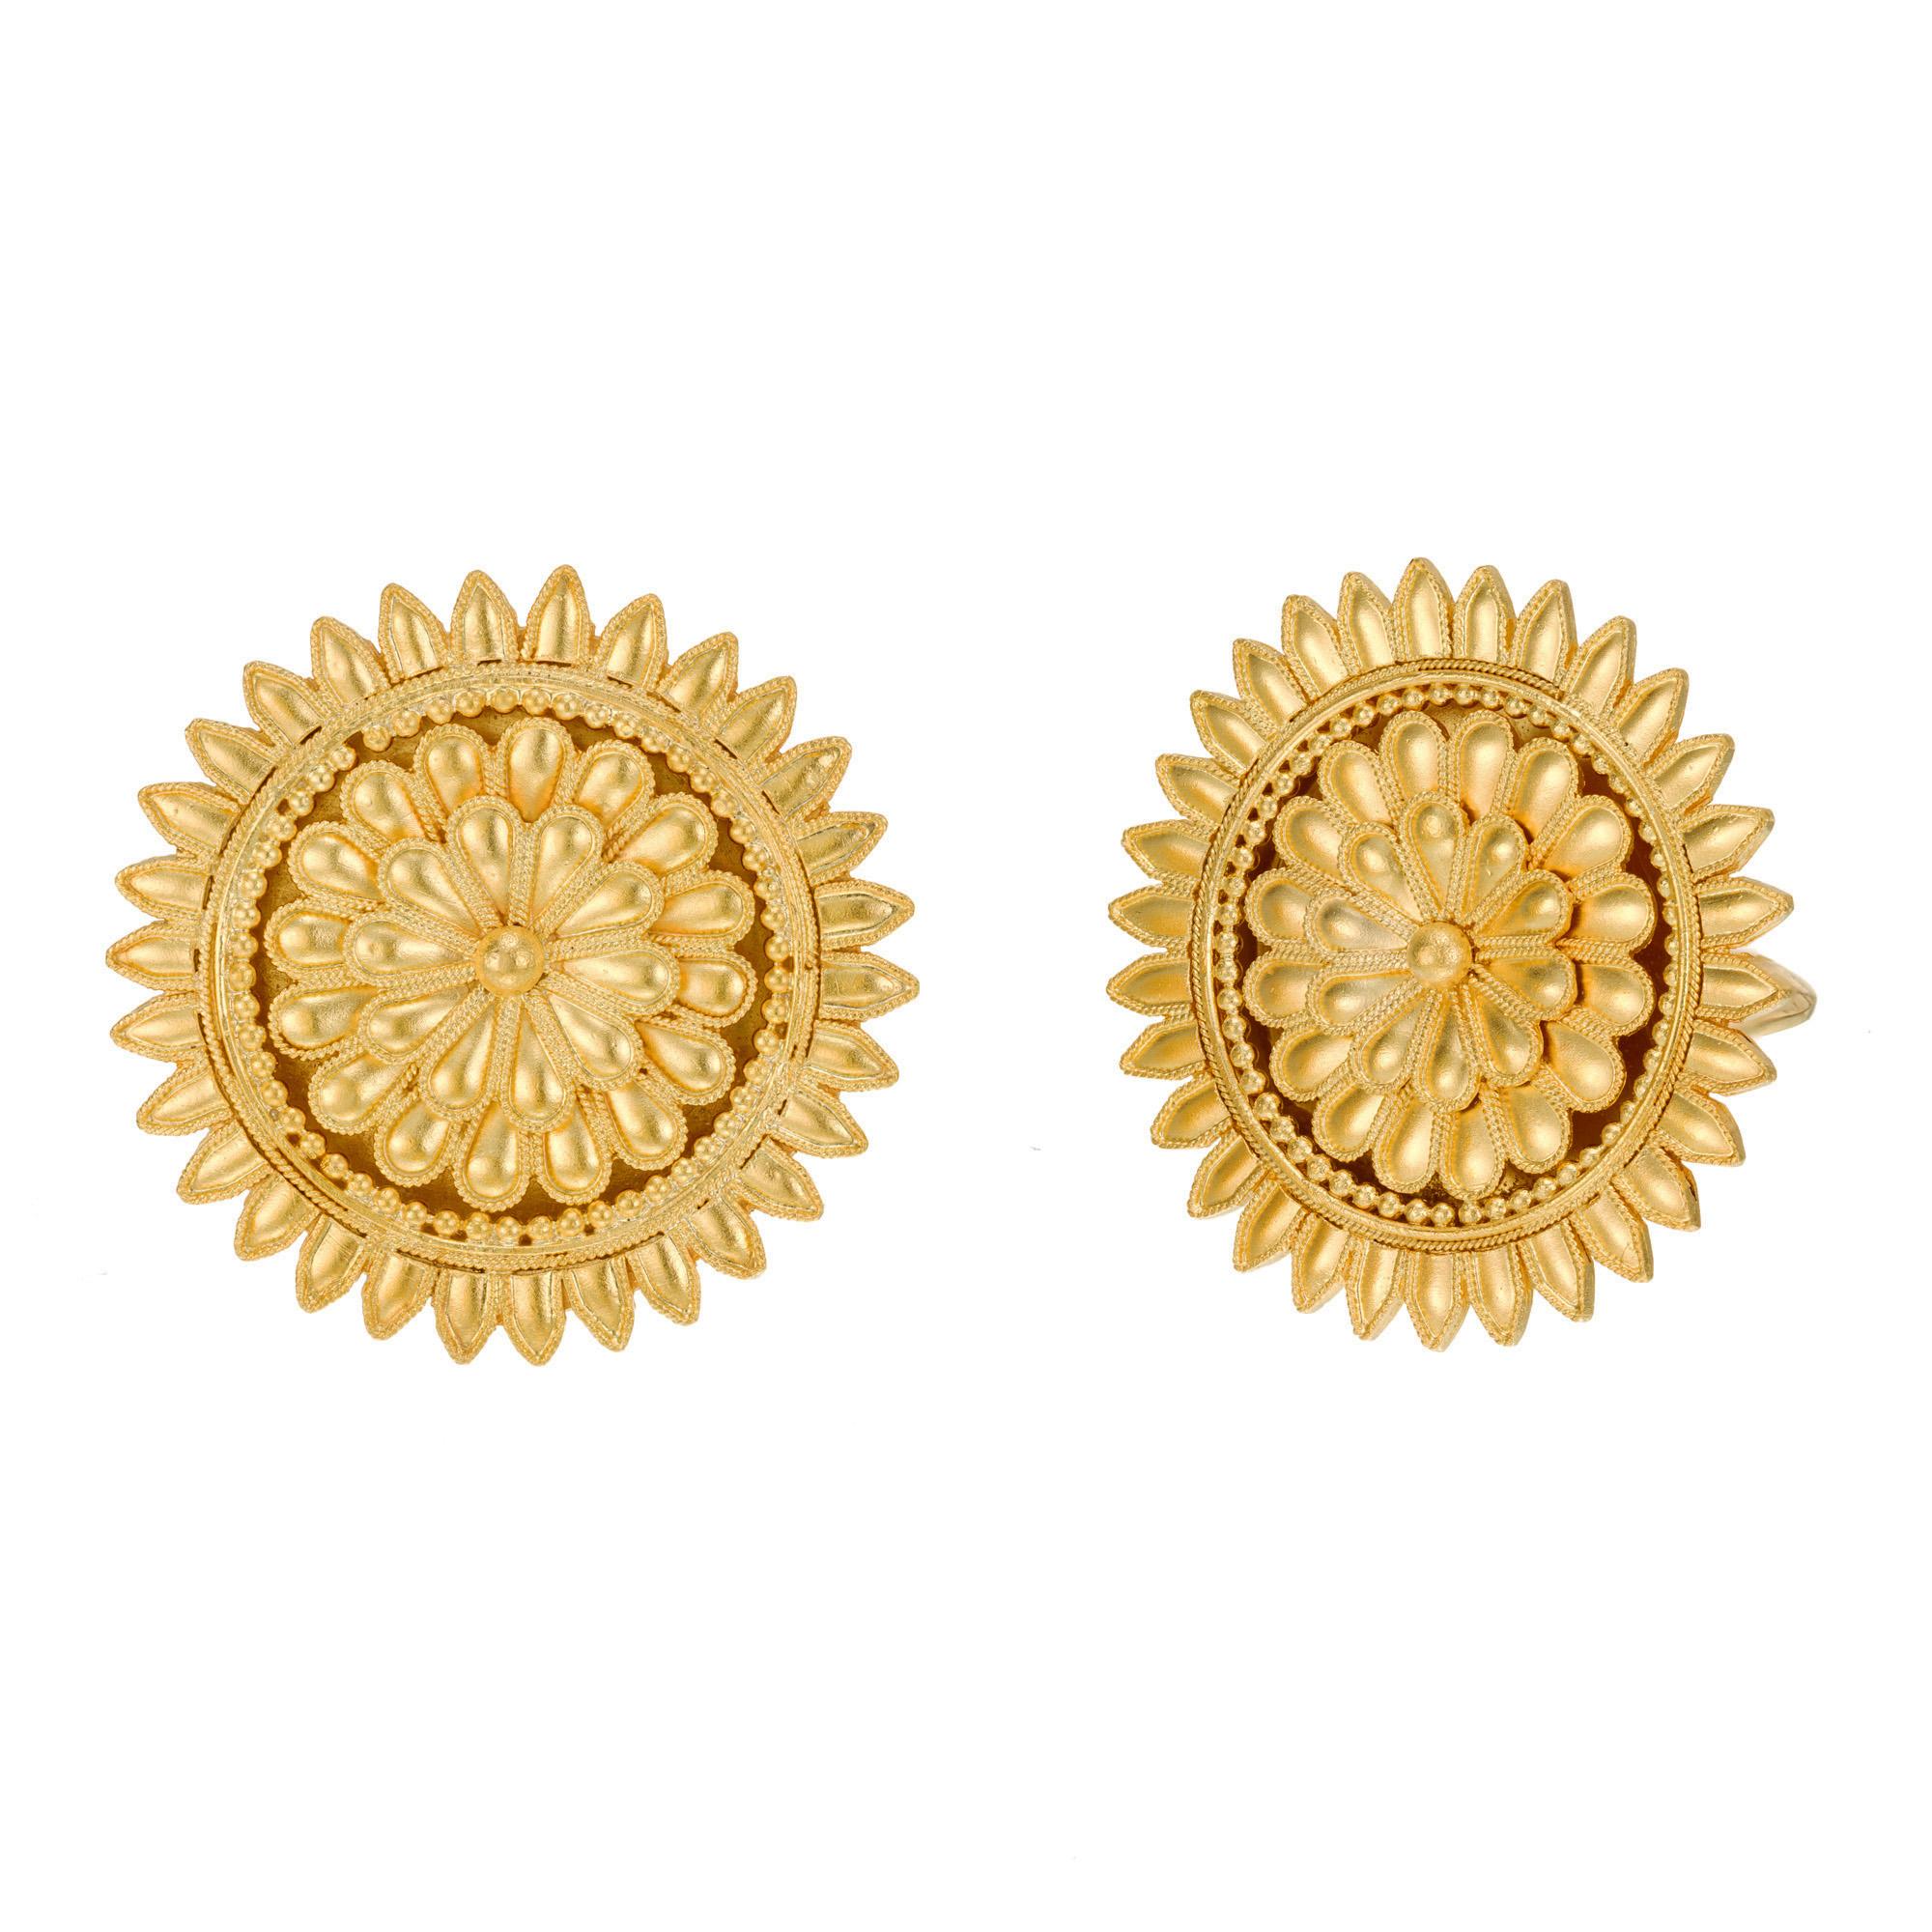 Handmade sunburst design textured Greek clip post 18k yellow gold earrings.

18k yellow gold 
Stamped: 750 Greece
24.0 grams
Top to bottom: 31.8mm or 1.25 Inches
WIdth: 31.7mm or 1.25 Inches
Depth or thickness: 3.9mm
